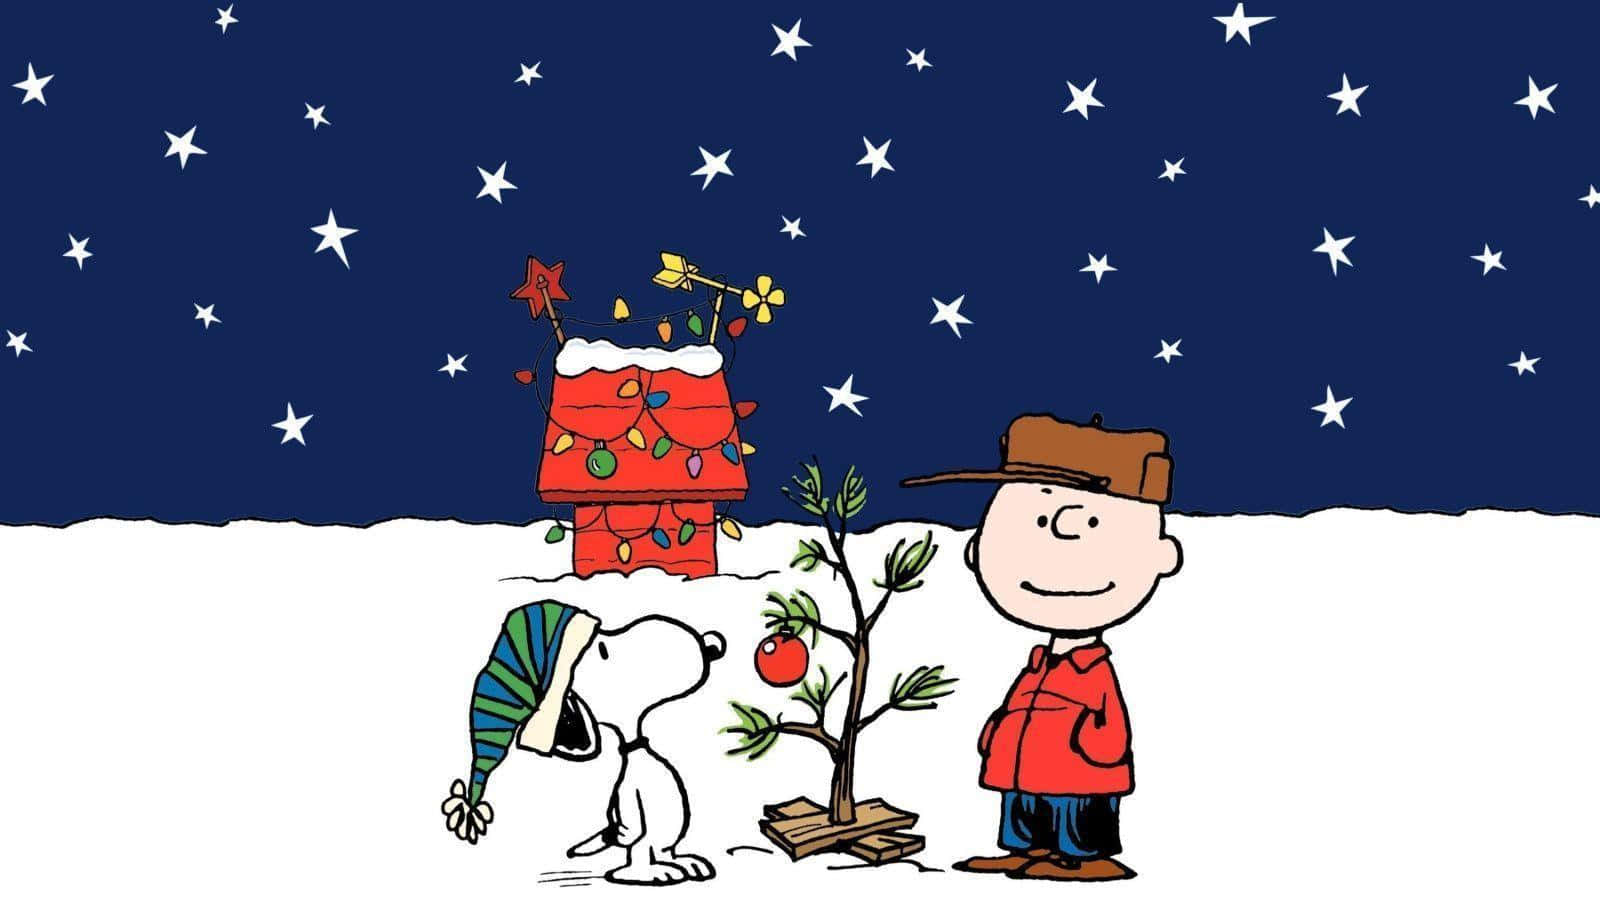 Celebrating The Christmas Spirit With Peanuts Wallpaper